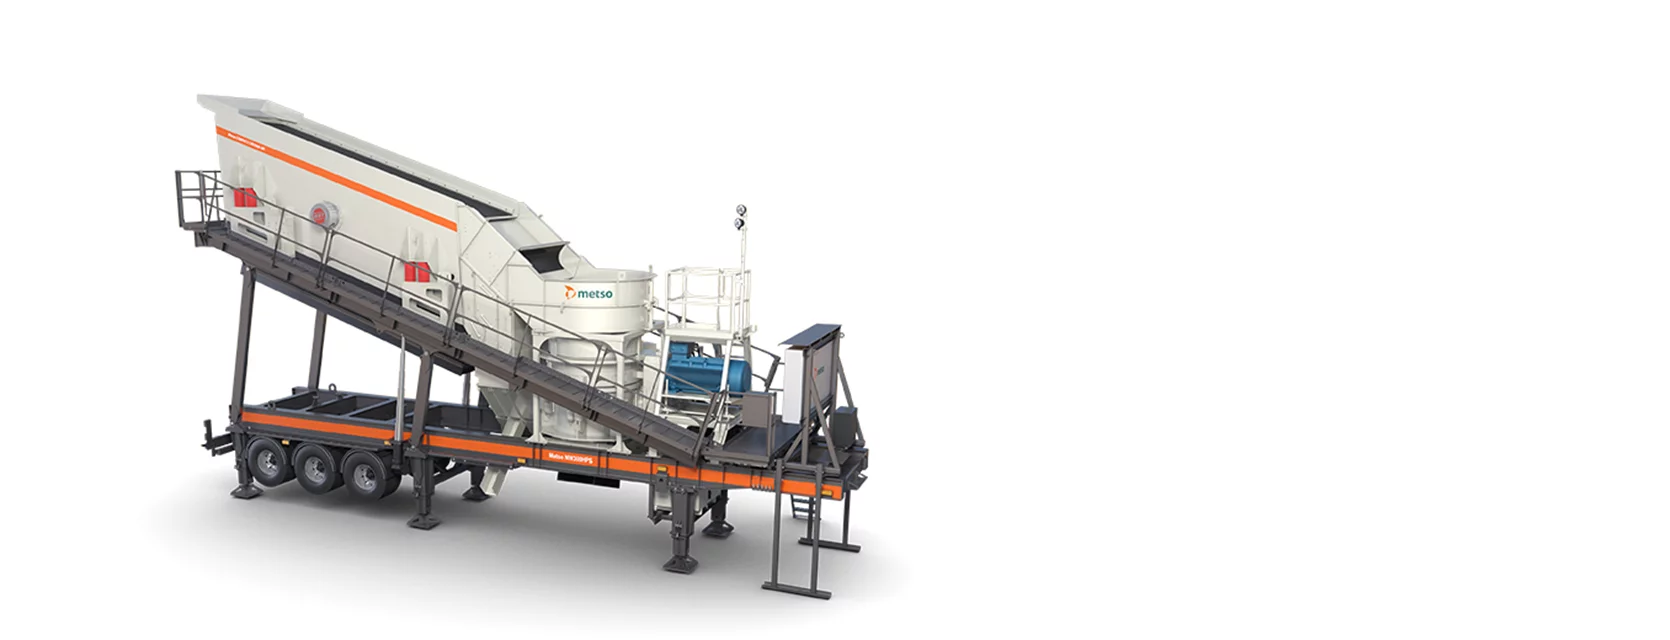 2020-01-09-21.26.28nw300hps-rapid-portable-cone-crusher-plant.webp